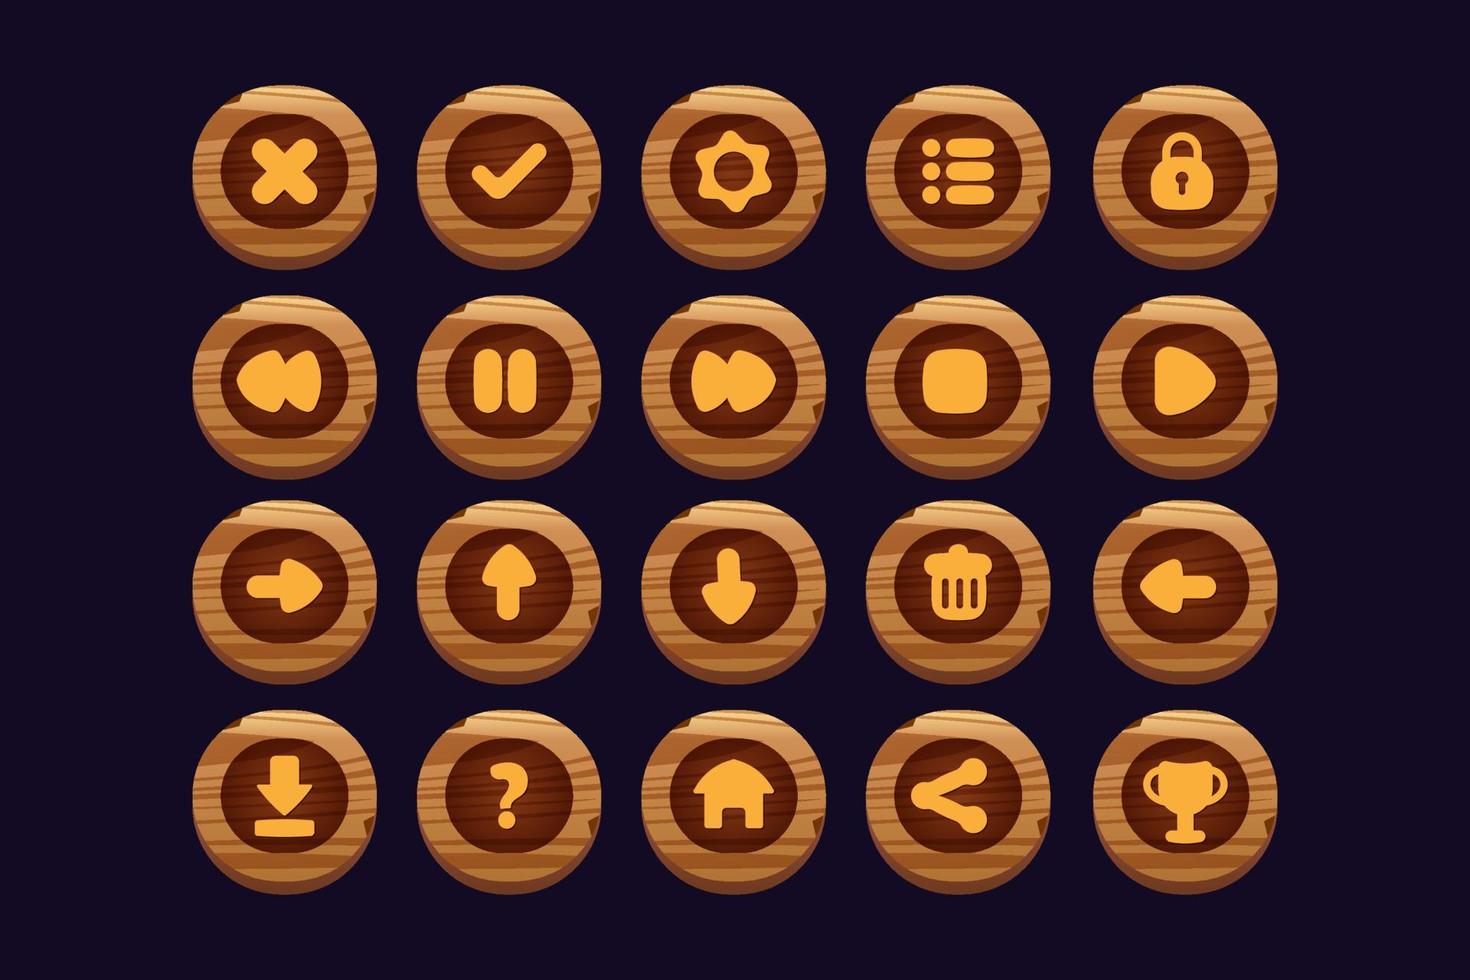 Game buttons of wooden and gold texture cartoon menu interface elements vector